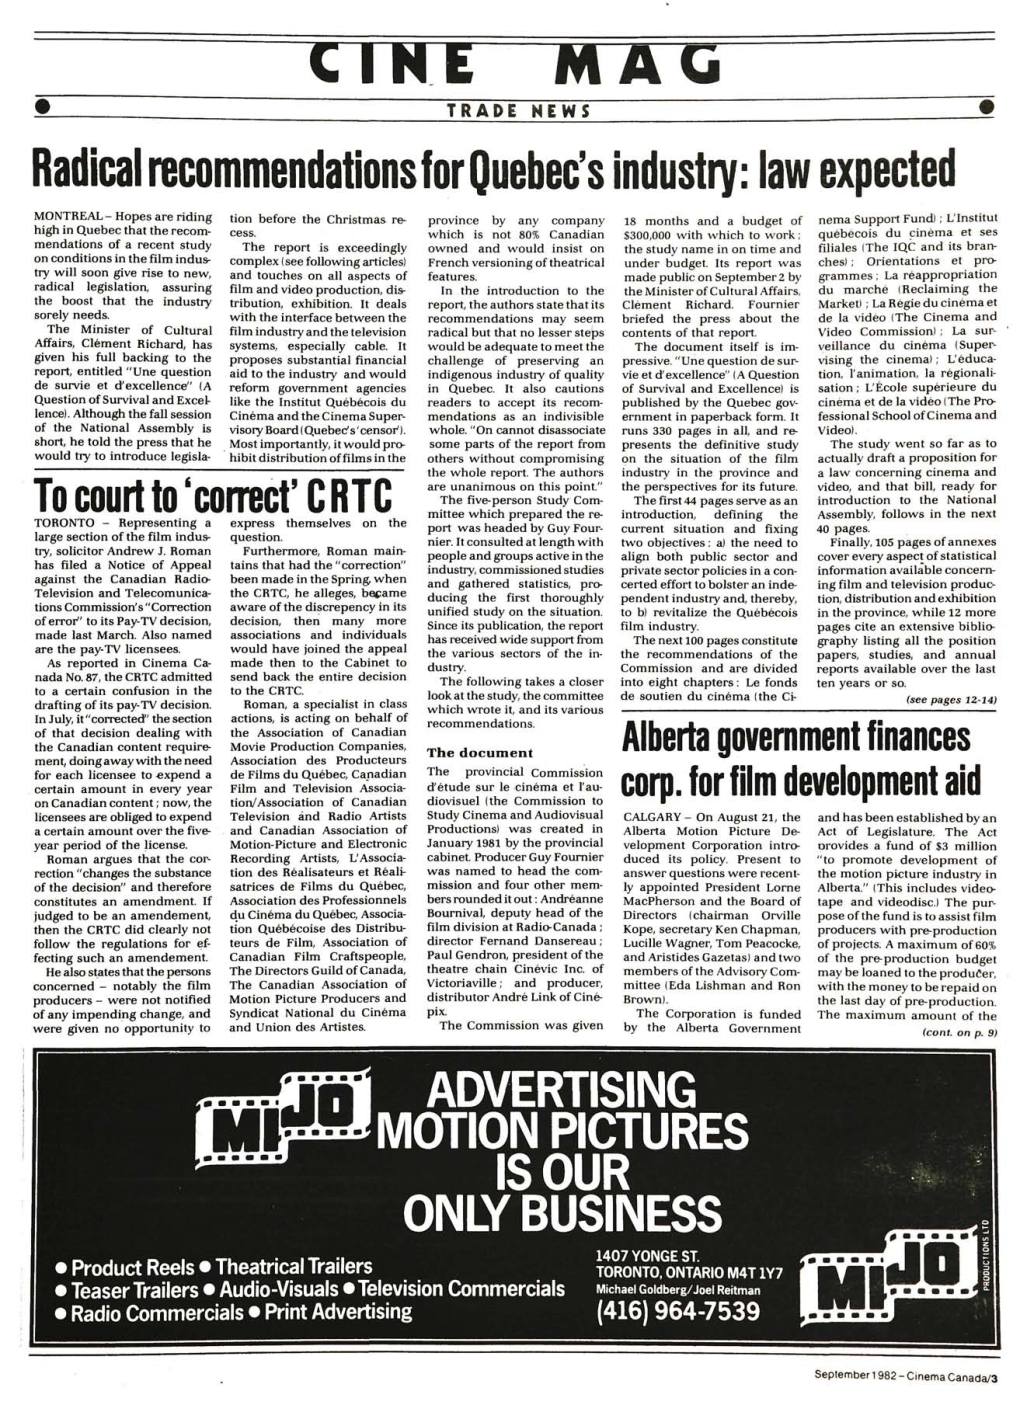 CINE MAG TRADE NEWS Radical Recommendationsf Or Quebec's Industry: Law Expected